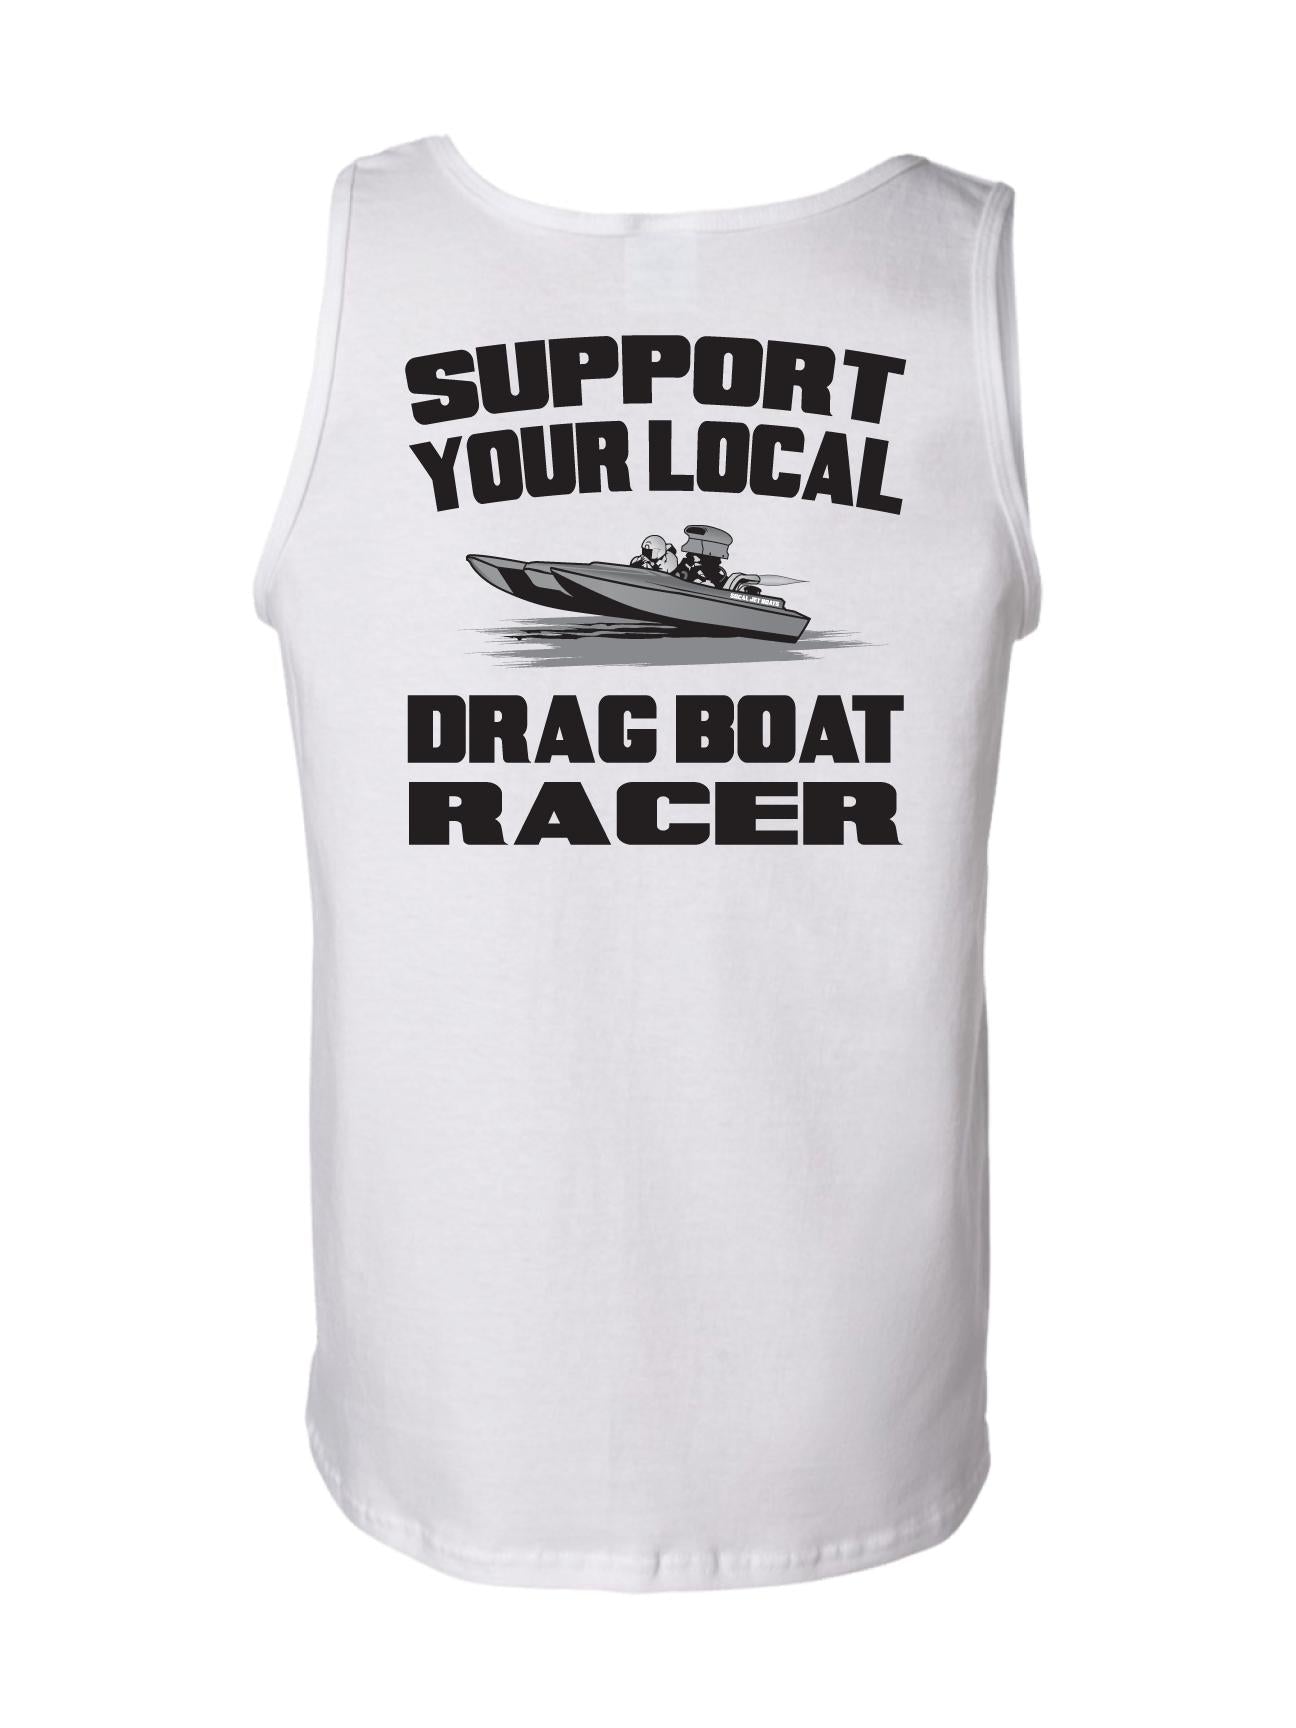 Support Your Local Drag Boat Racer - Men's White Tank Top